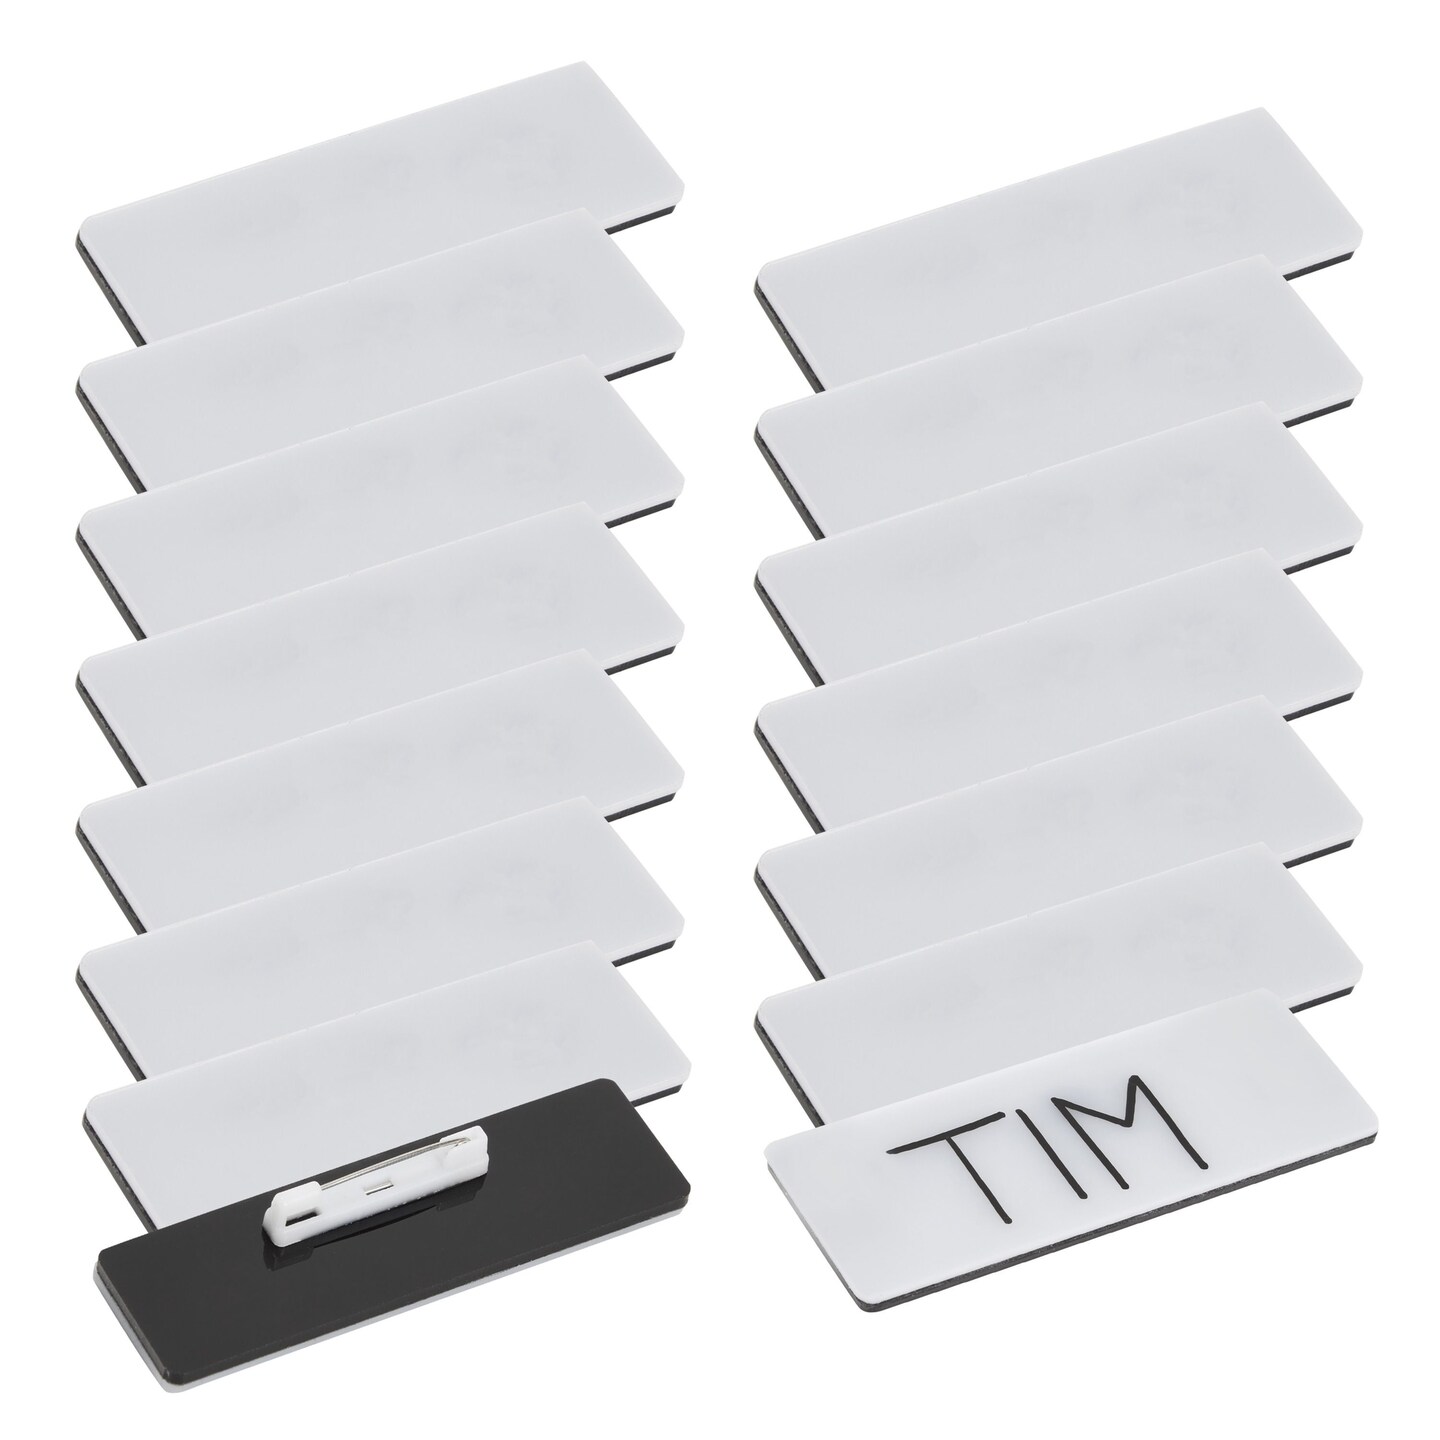 Juvale 15-Pack Blank White Name Tag Badges with Pin Backing, 3 x 1 Inches